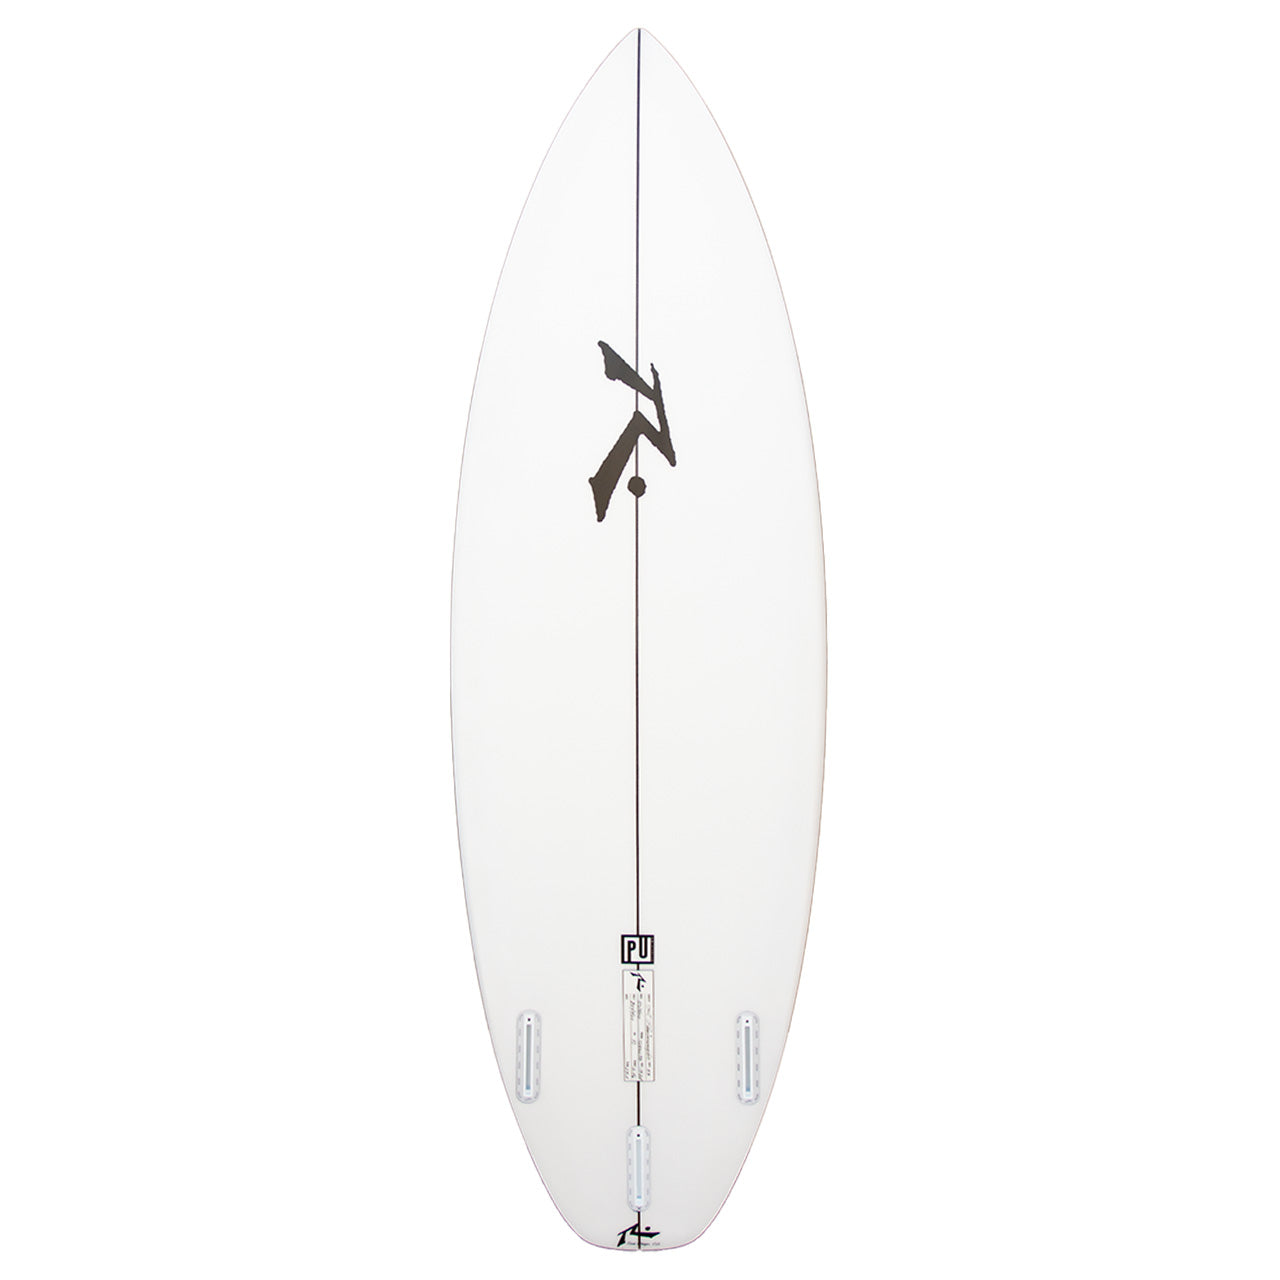 SD Grom Shortboard - Deck View - Rusty Surfboards